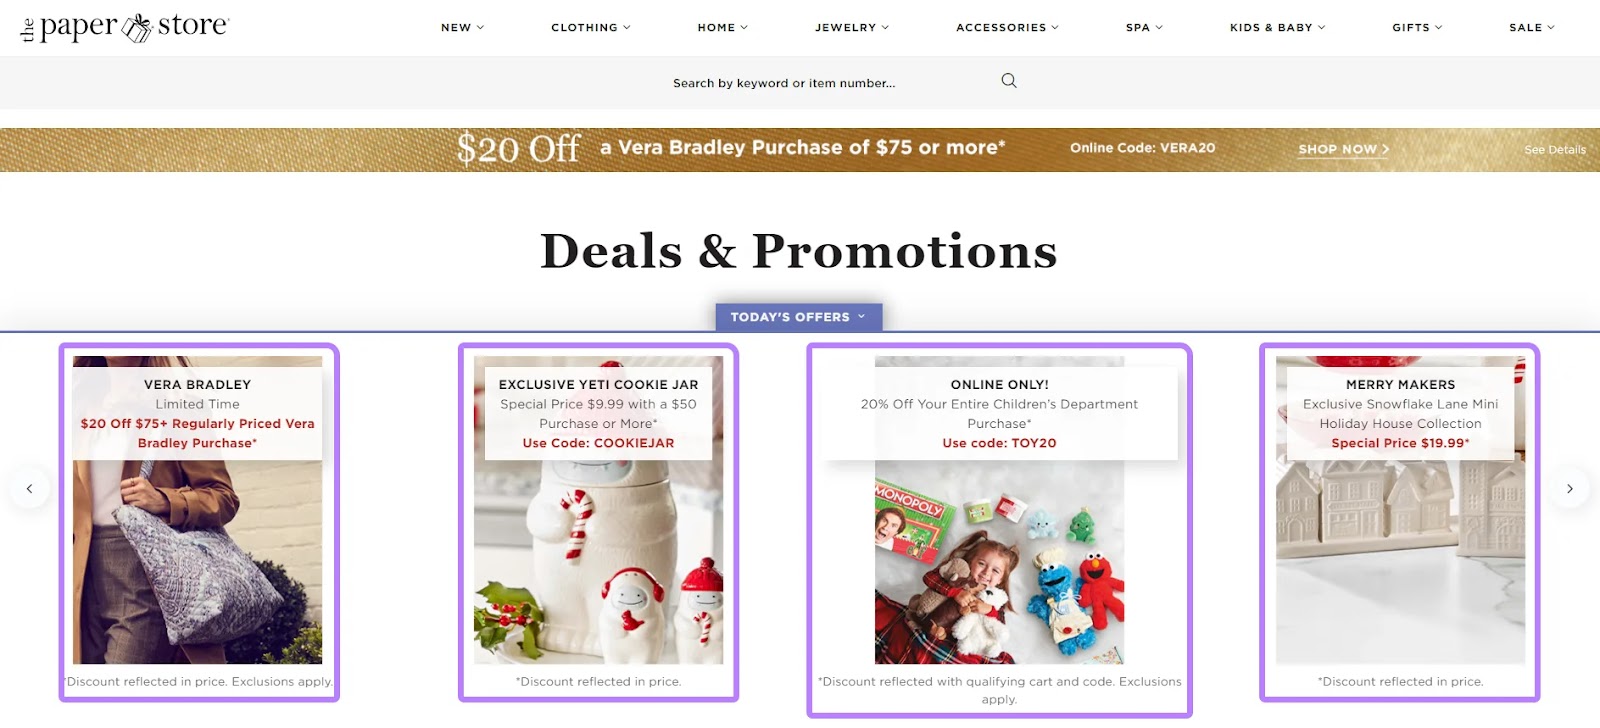 "Deals & Promotions" section of the page